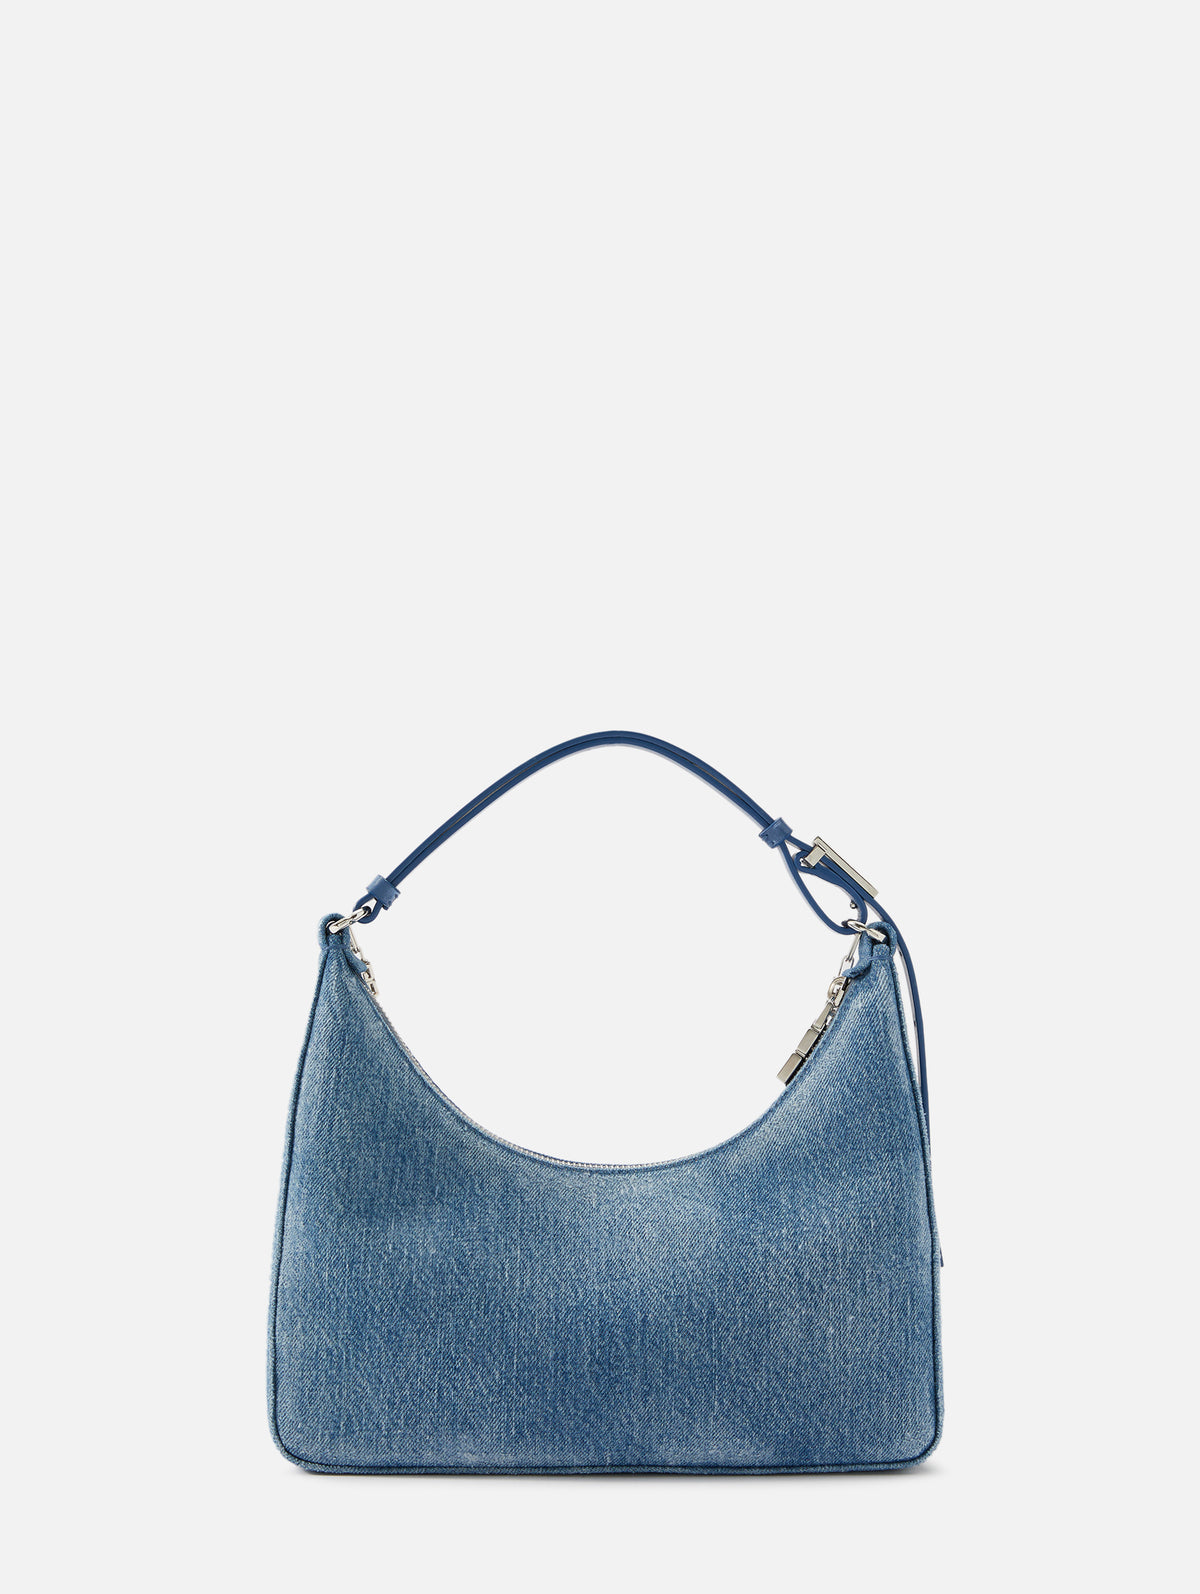 Givenchy Small Moon Cut Out Leather Hobo Bag